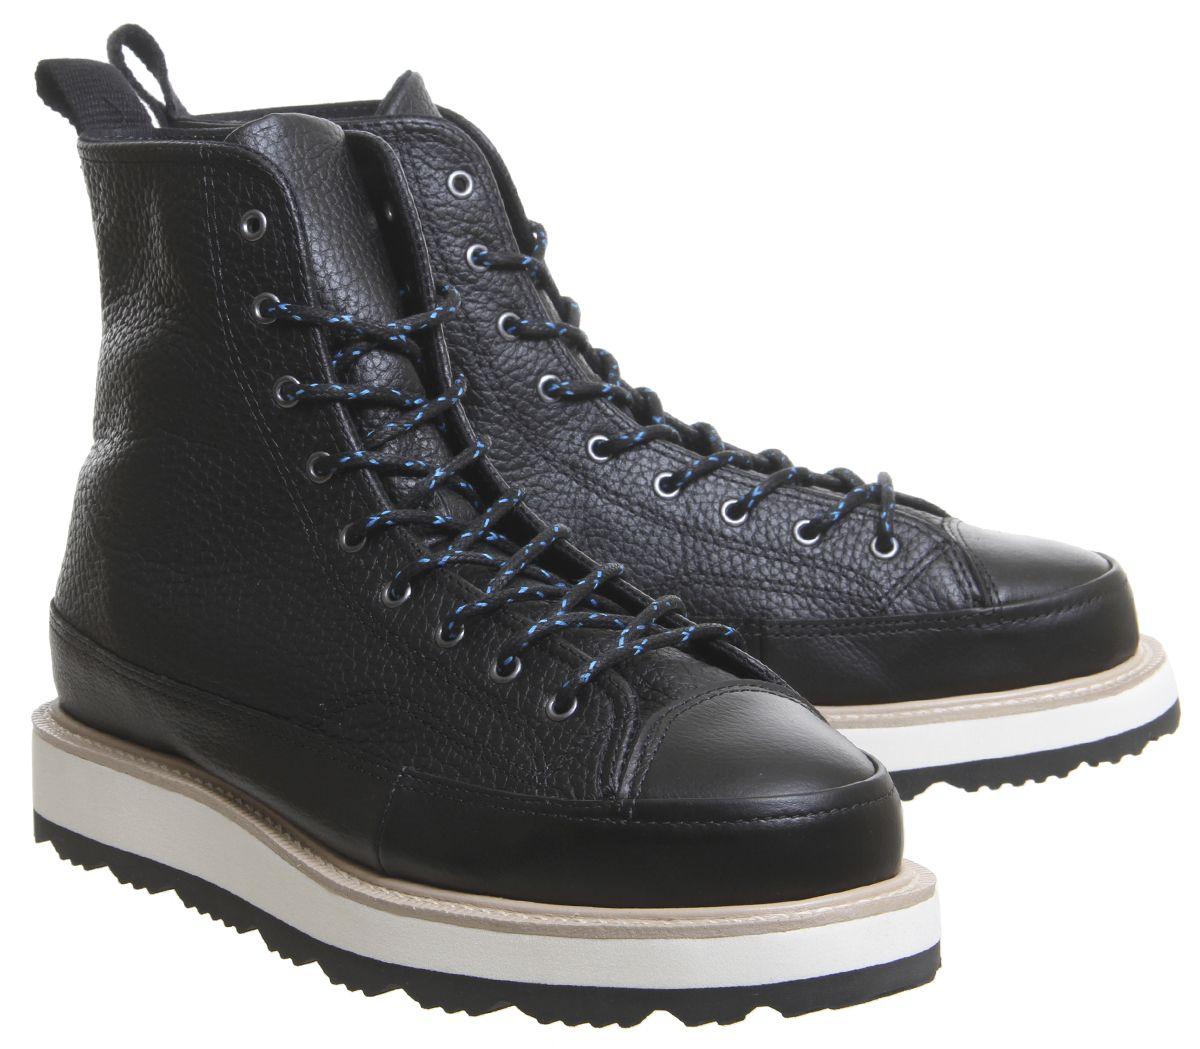 Converse Leather Ct Crafted Boots in Black for Men - Lyst